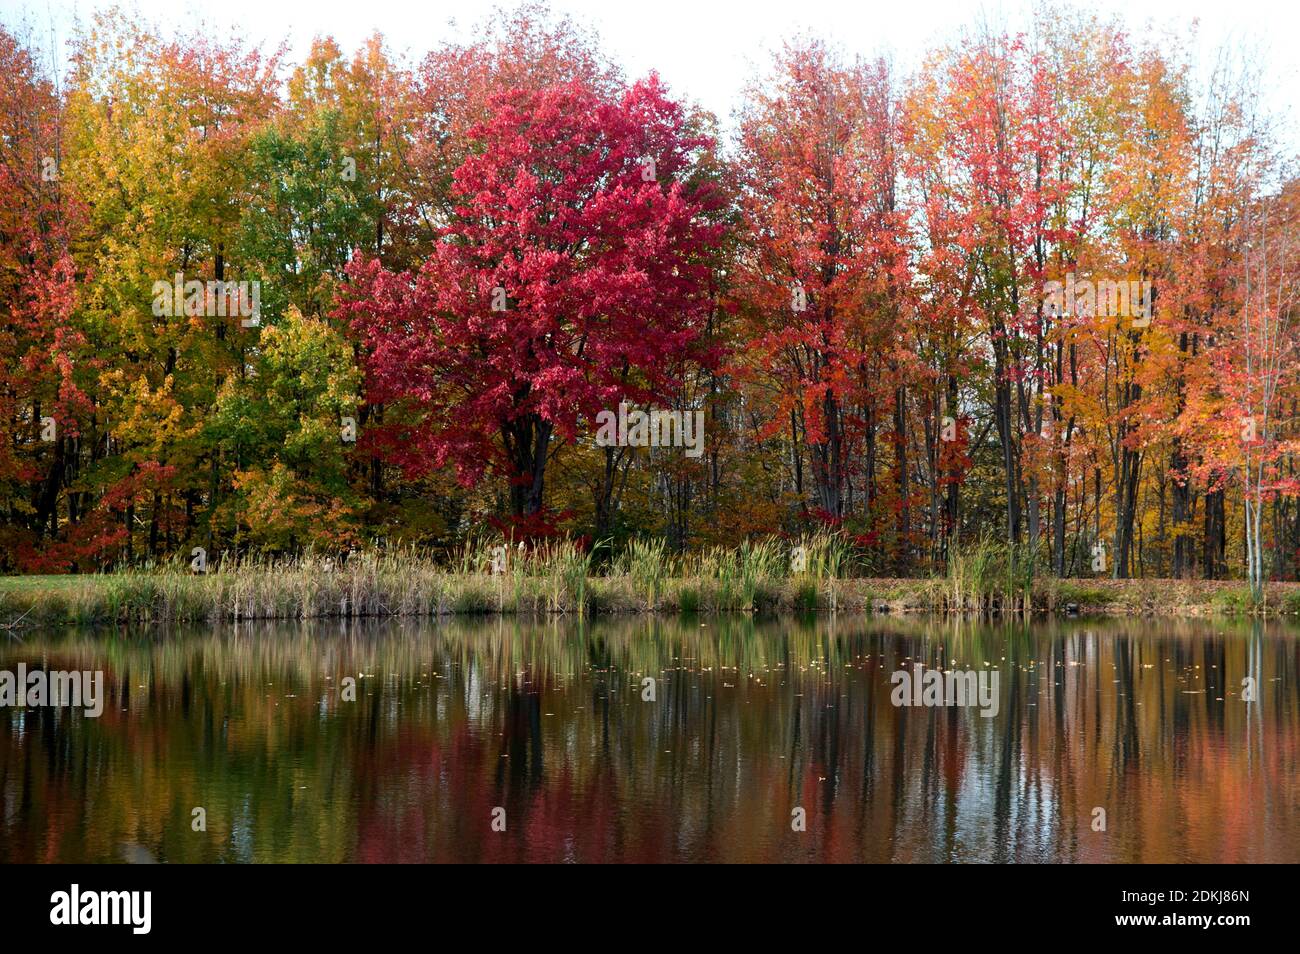 Fall colors reflected on a lake in New England, Maine, United States Stock Photo